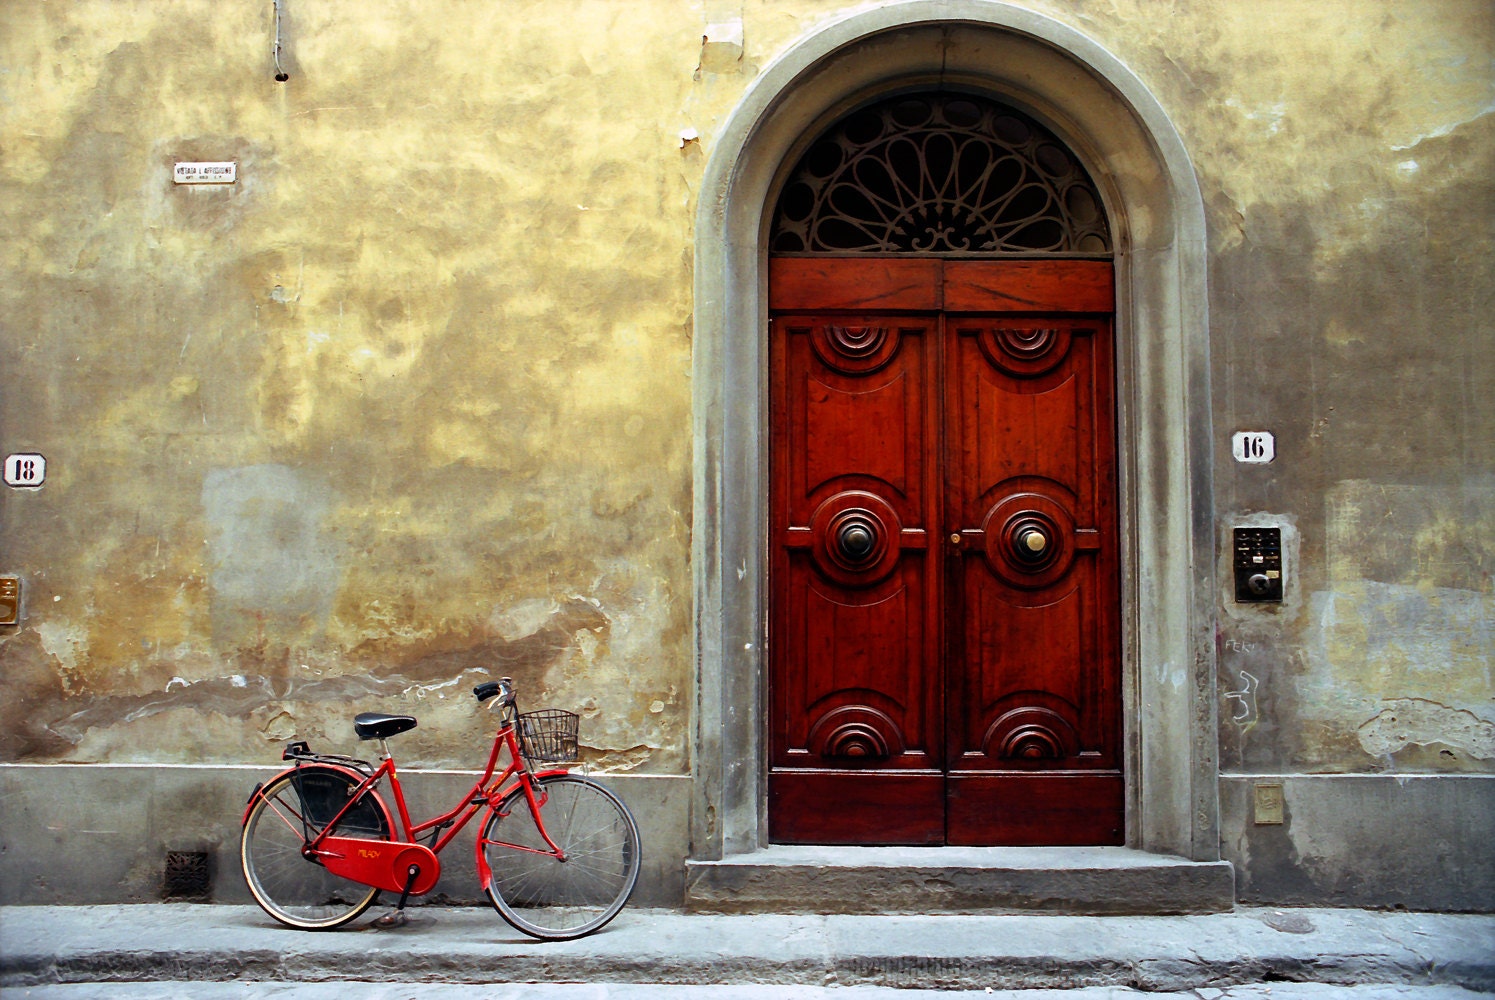 Red Bicycle 2, Florence:  8x12 inch archival inkjet print on 11x14 inch rag paper - RobertManz